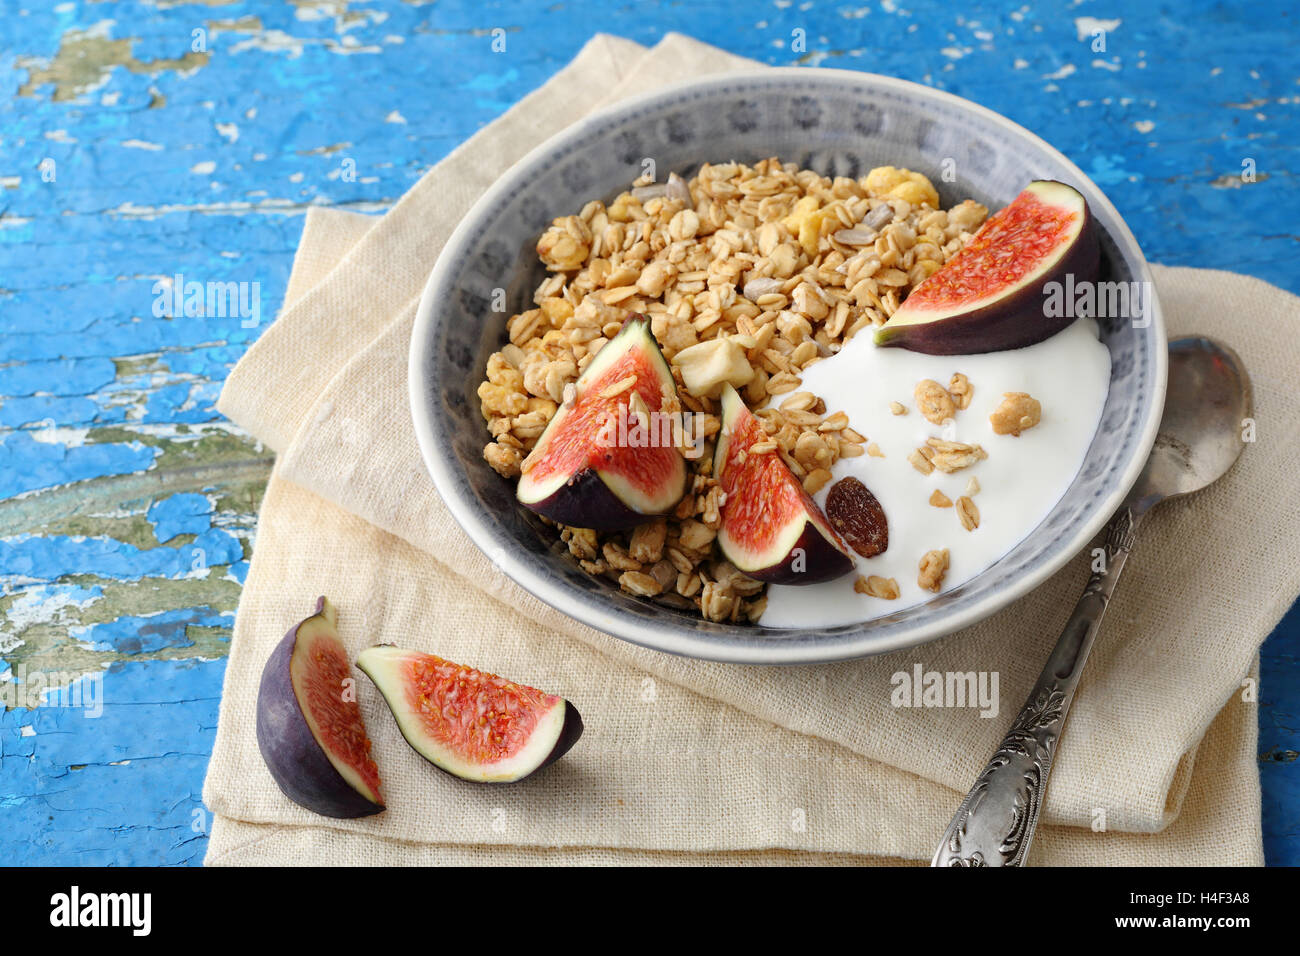 Morning cereal with fruits, breakfast Stock Photo